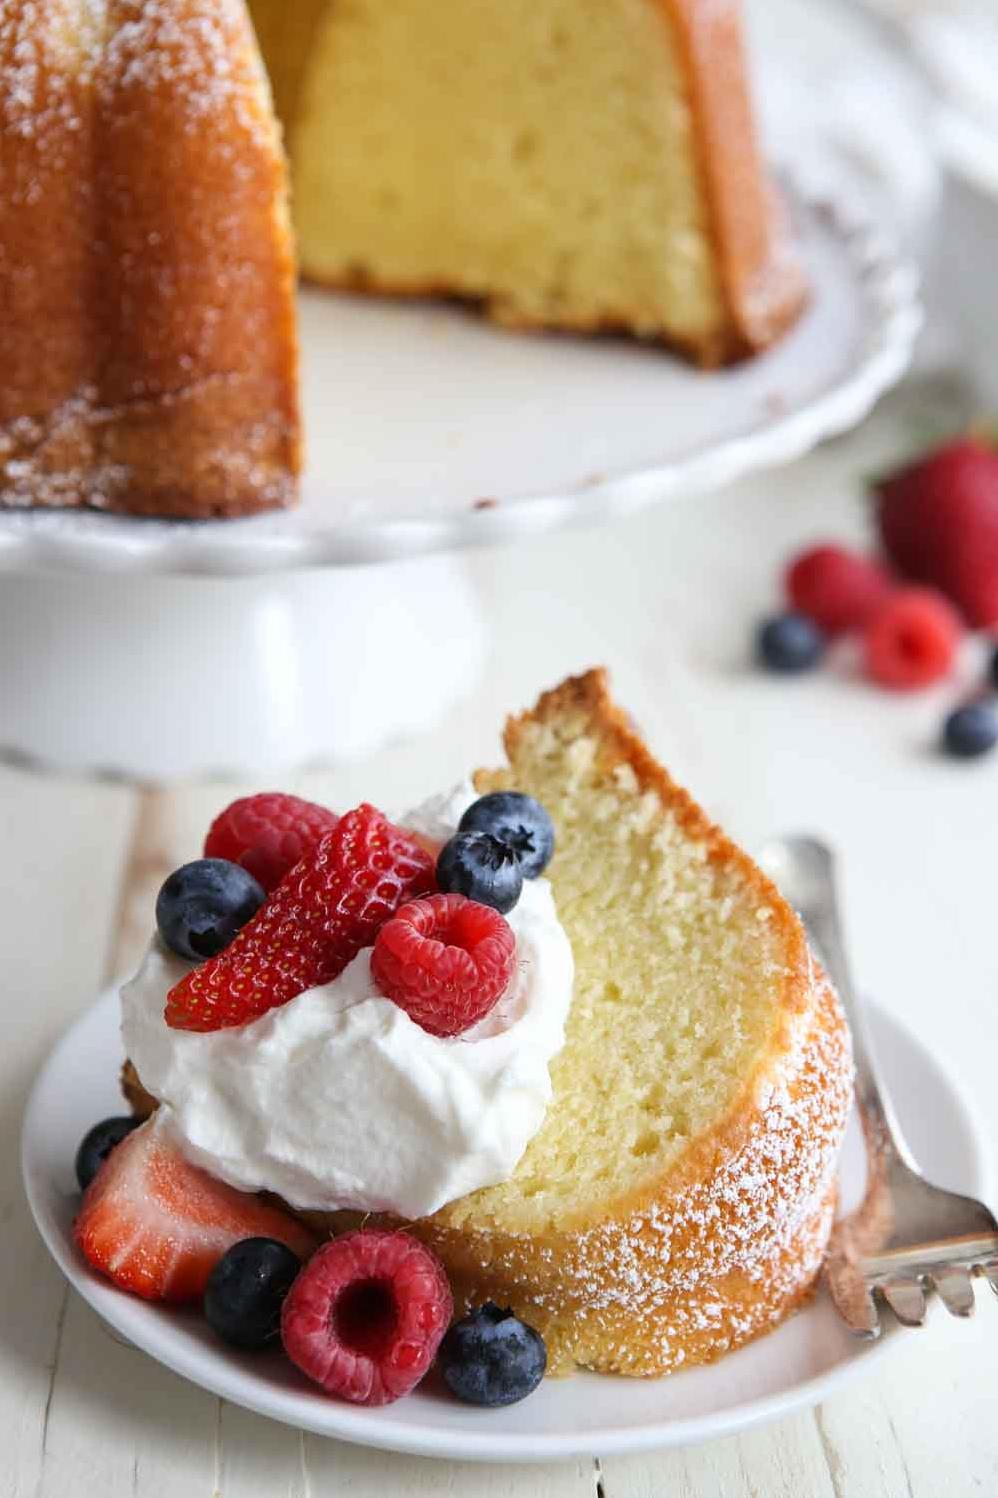  Golden and buttery: the perfect Cream Cheese Pound Cake.